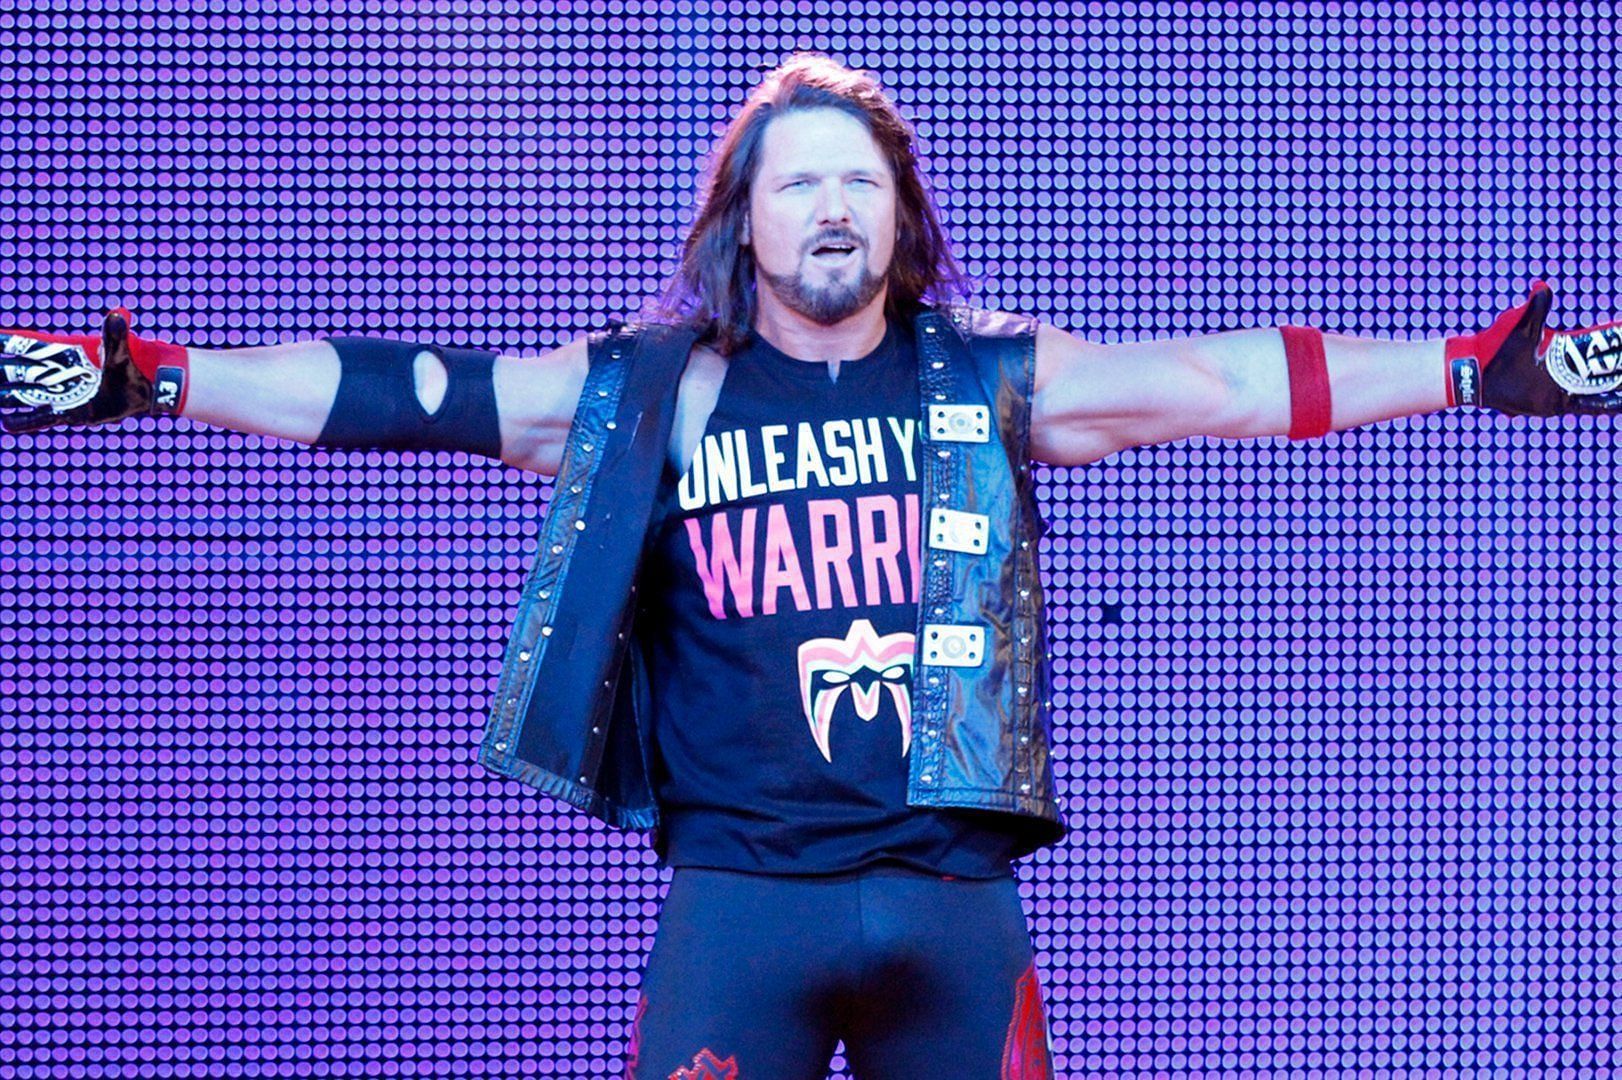 Styles debuted in the 2016 Royal Rumble when Reigns&#039; title was up for grabs.